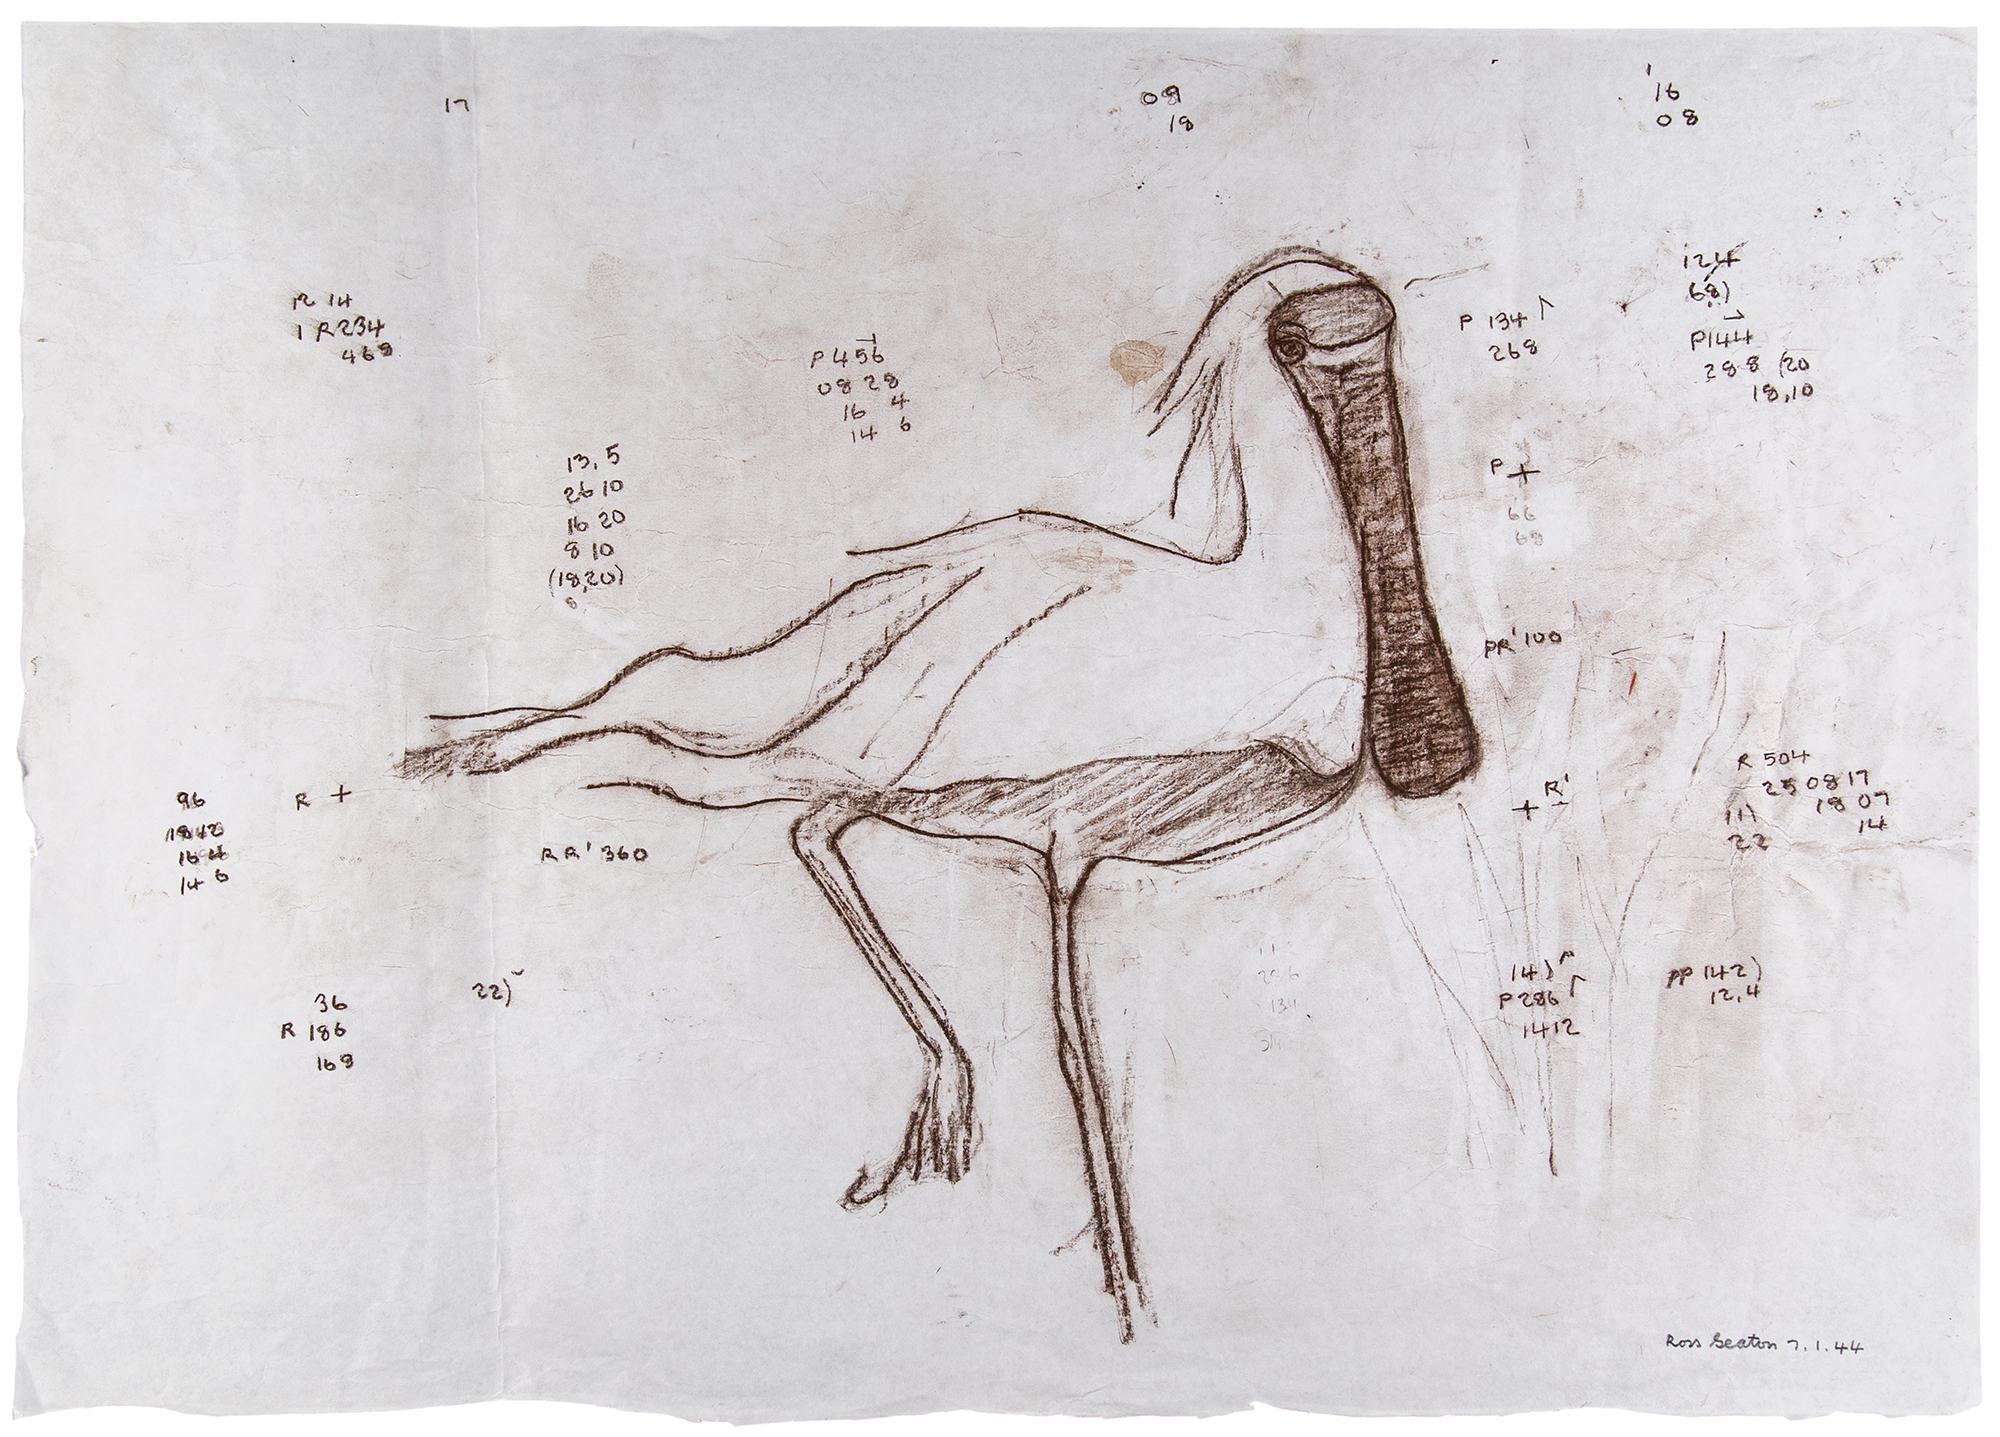 Drawing in brown pencil of a spoonbill on cream paper with numbers scattered across the paper